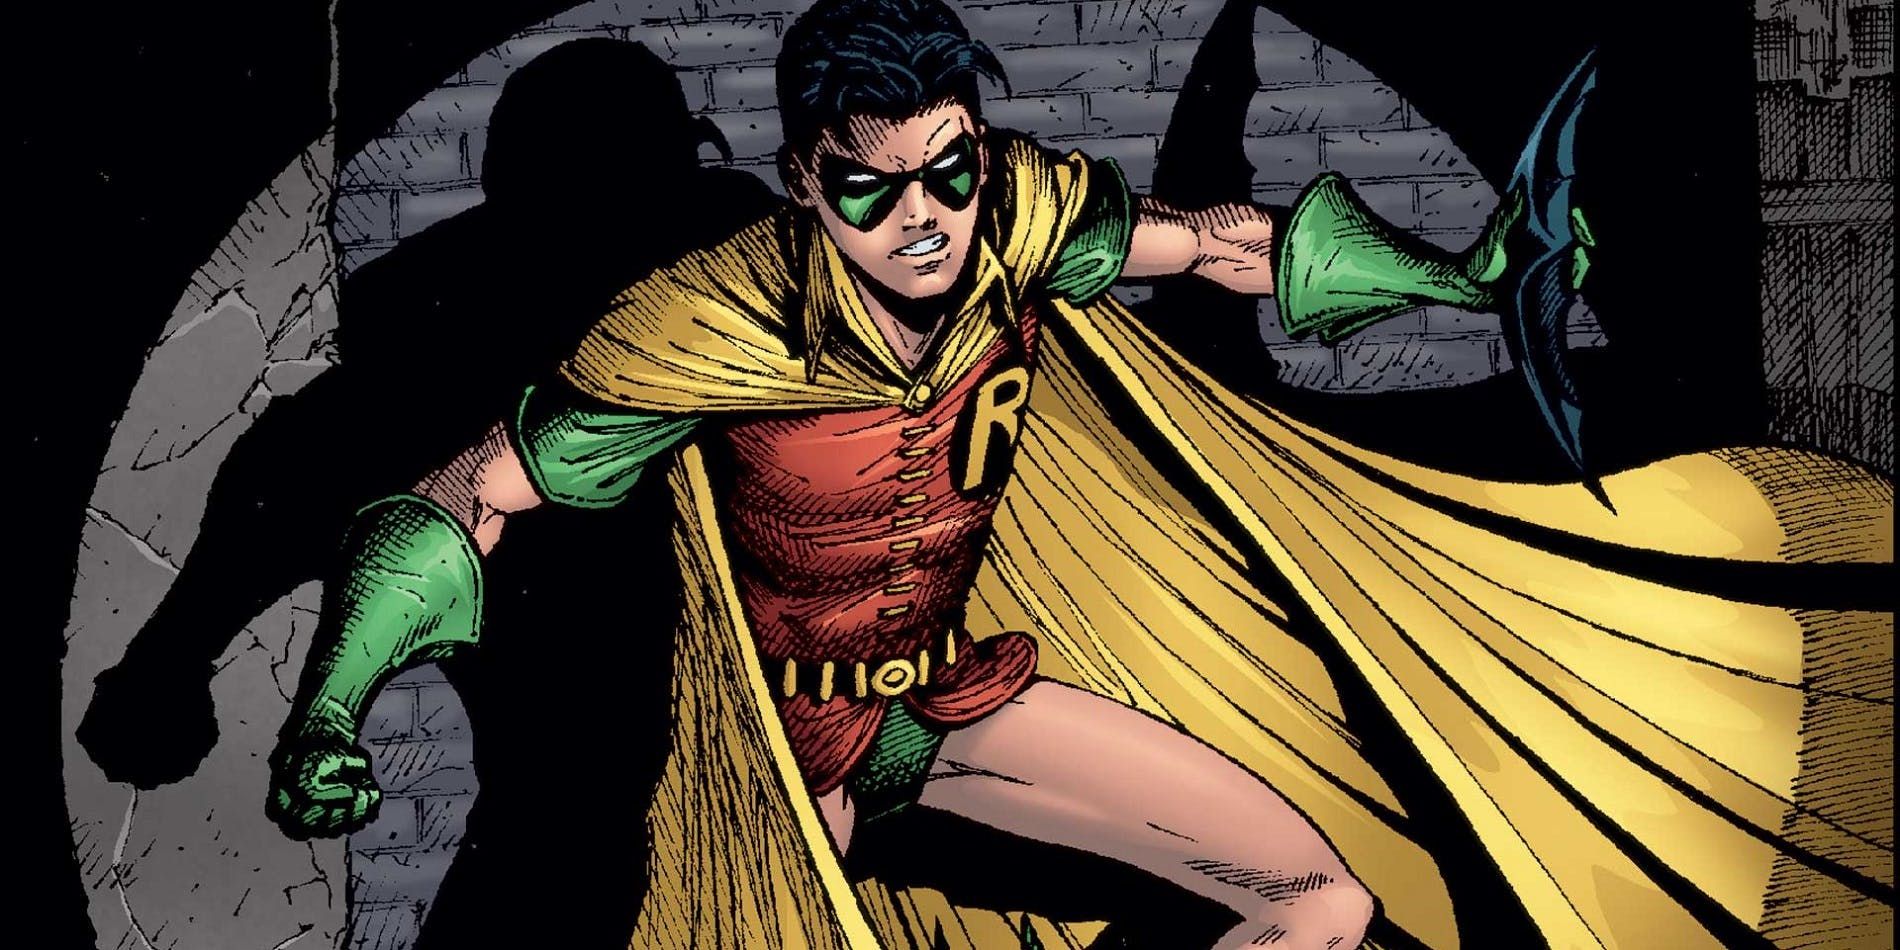 Dick-Grayson-as-Robin-from-DC-Comics